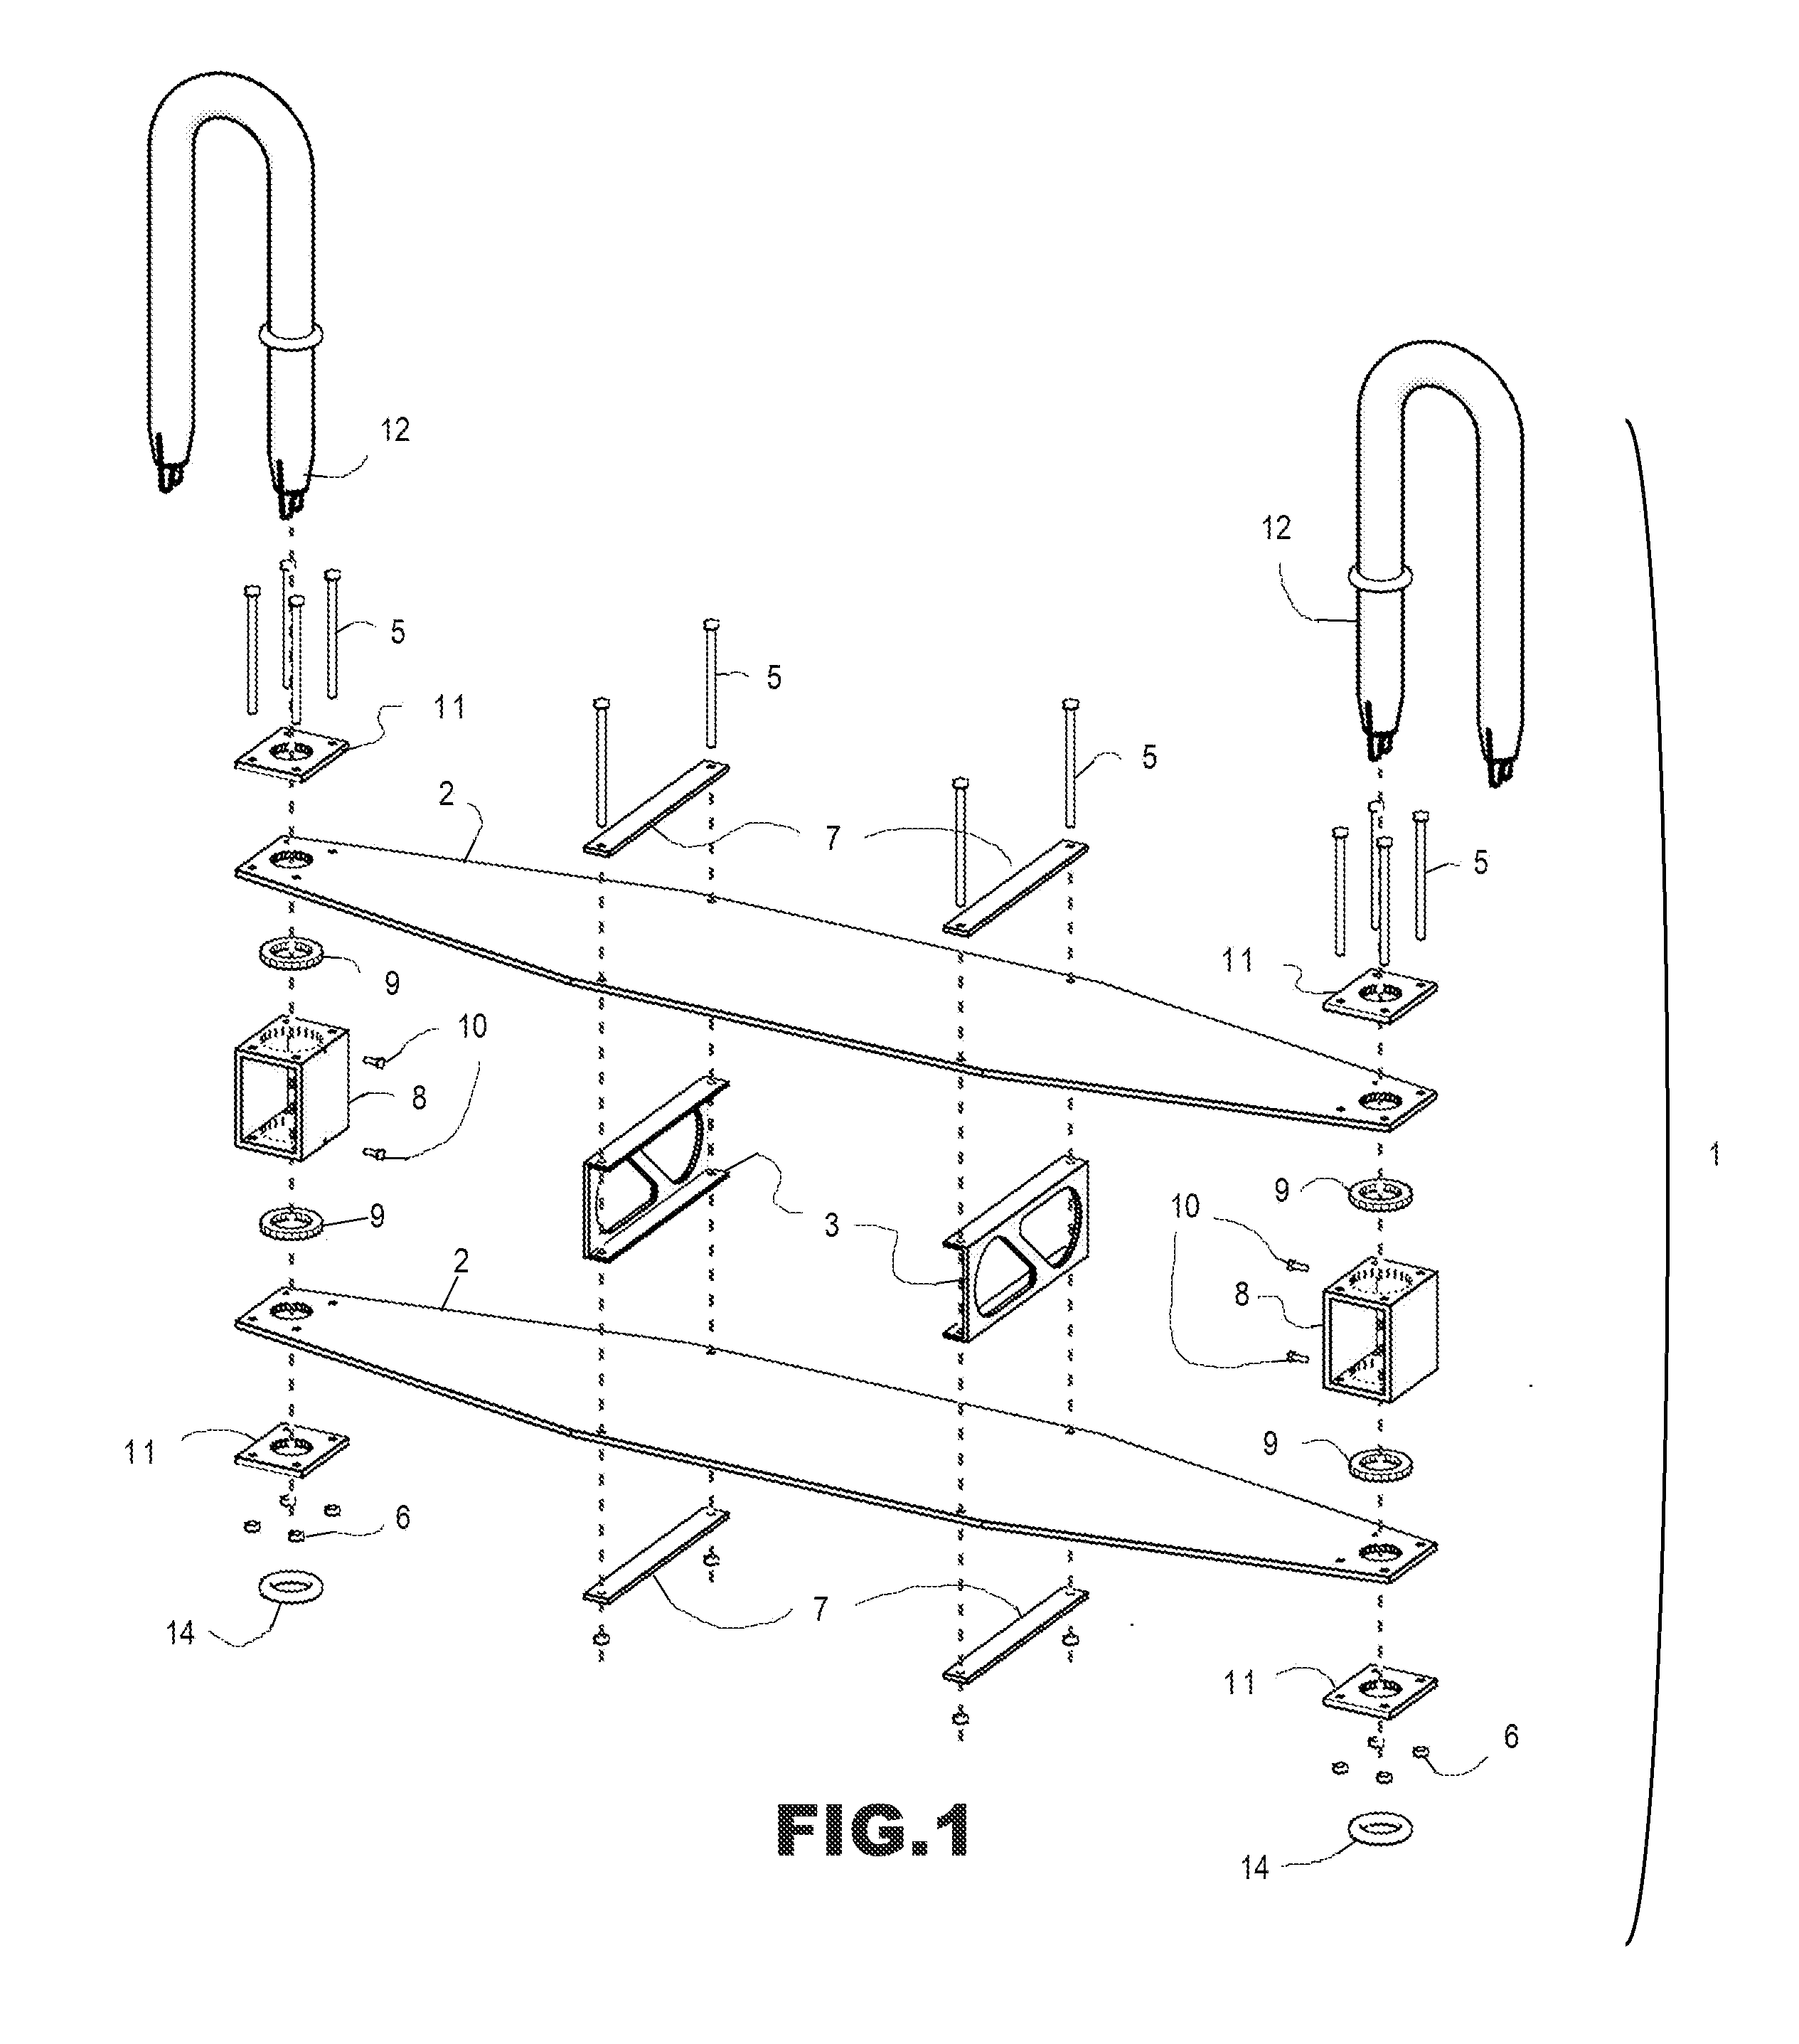 Lightweight polycarbonate suspension for vehicle